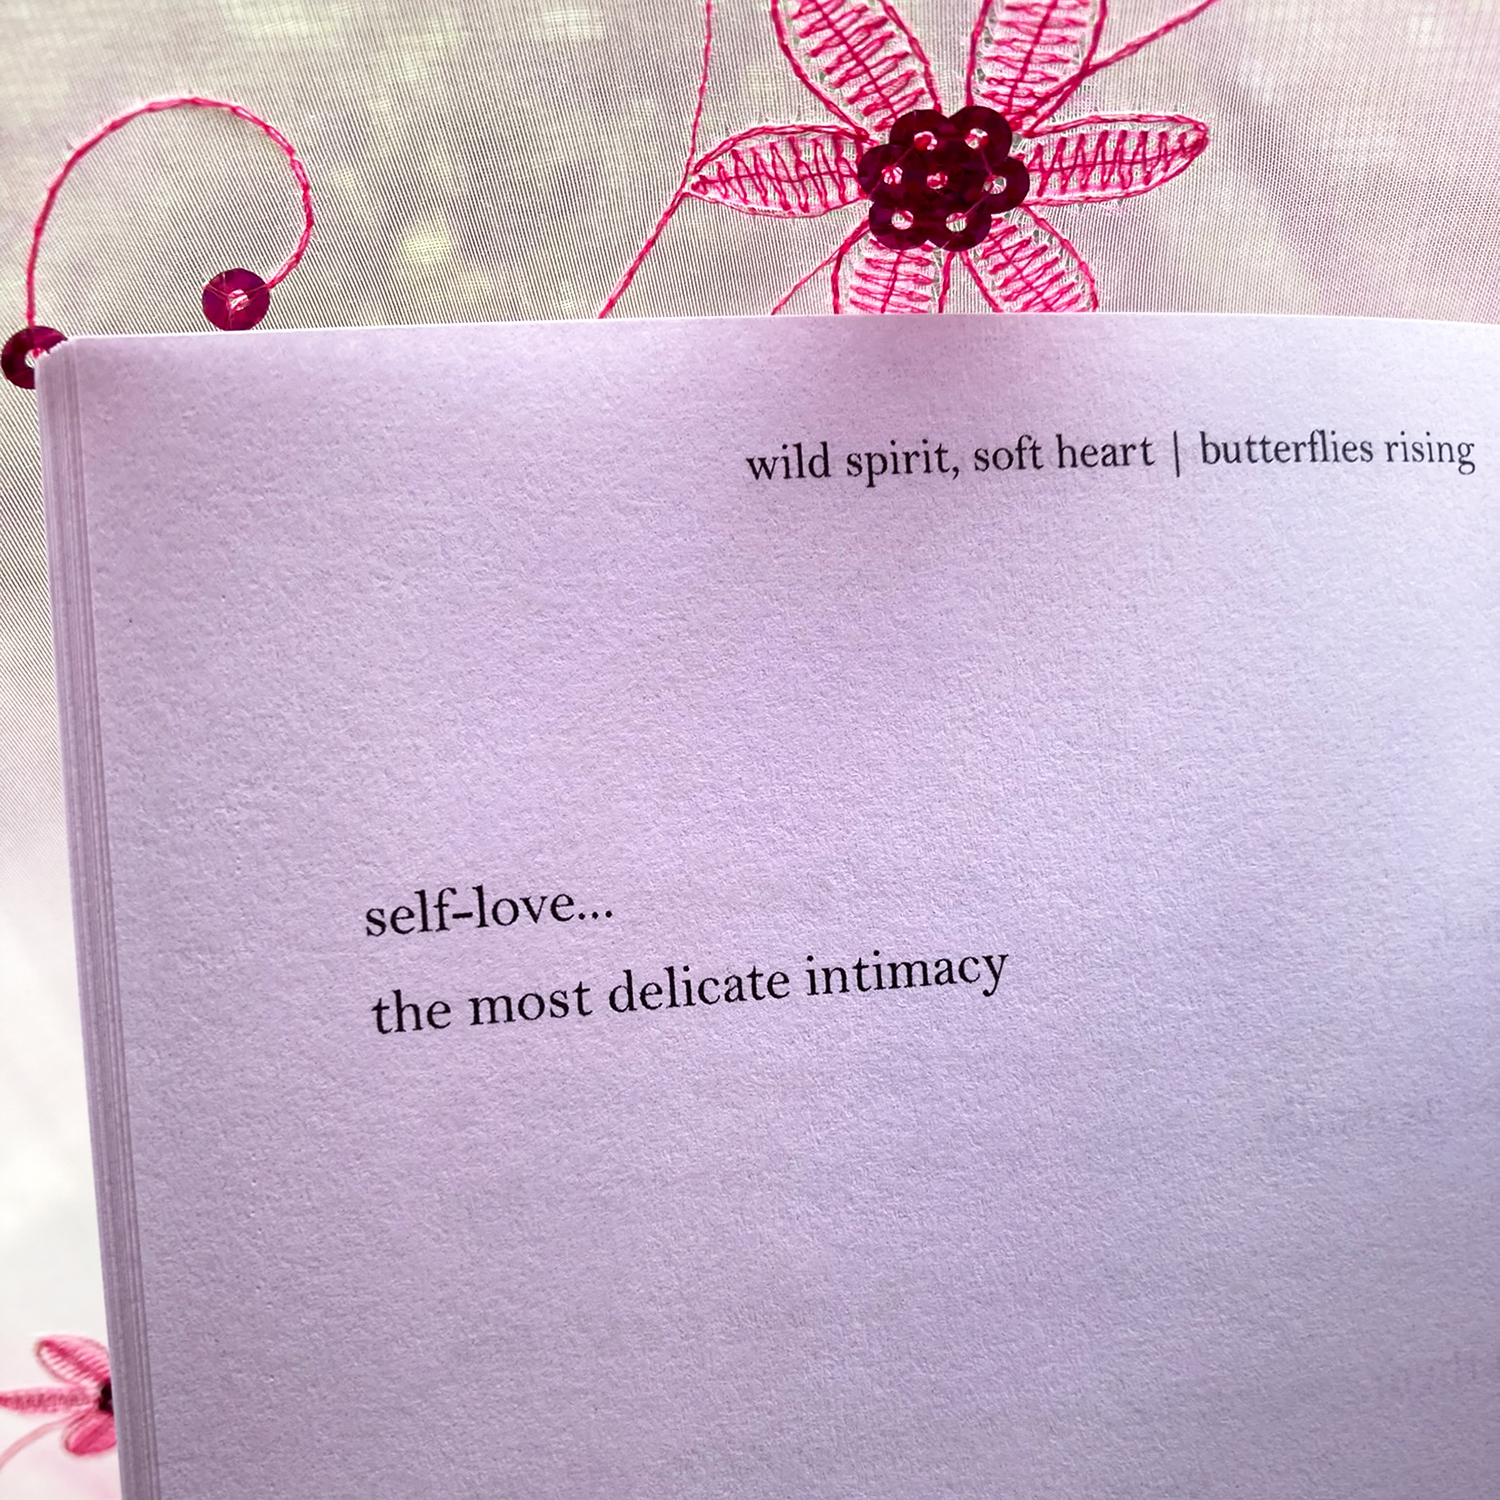 self-love… the most delicate intimacy - butterflies rising